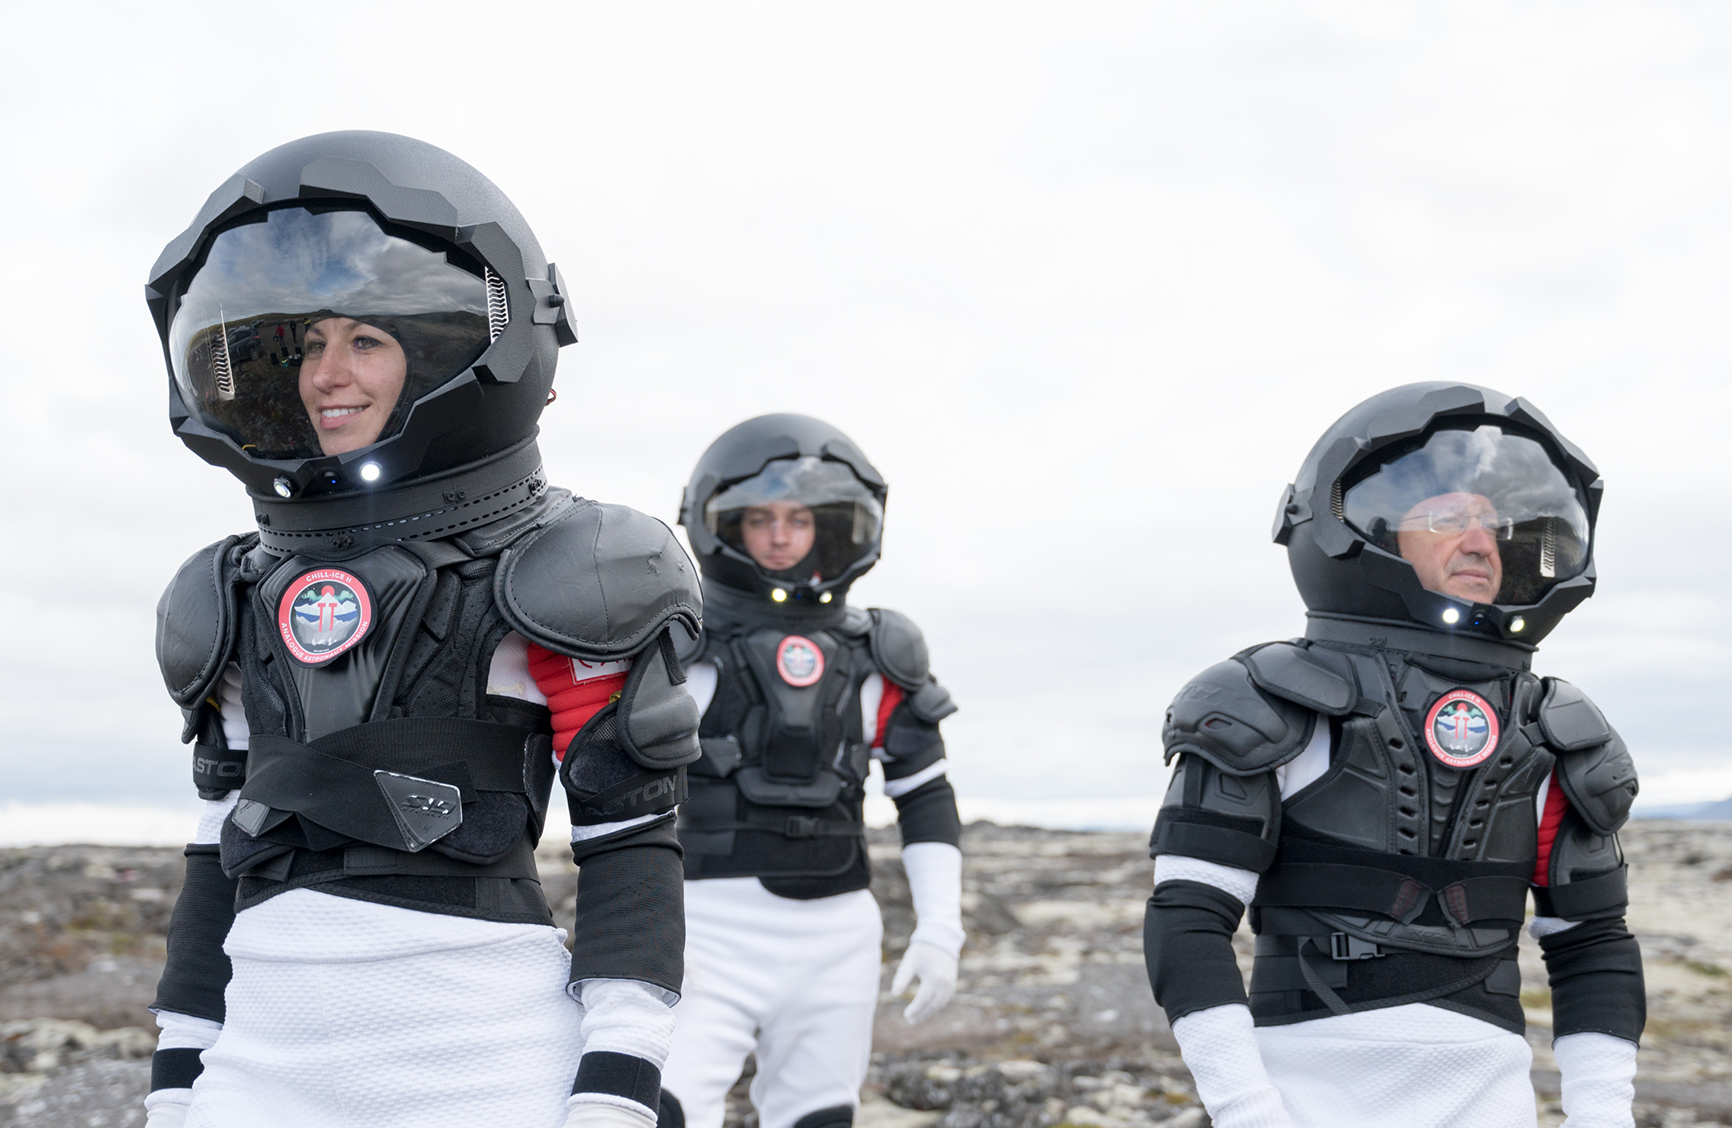 3 astronaughts in space suits on a rocky terrain